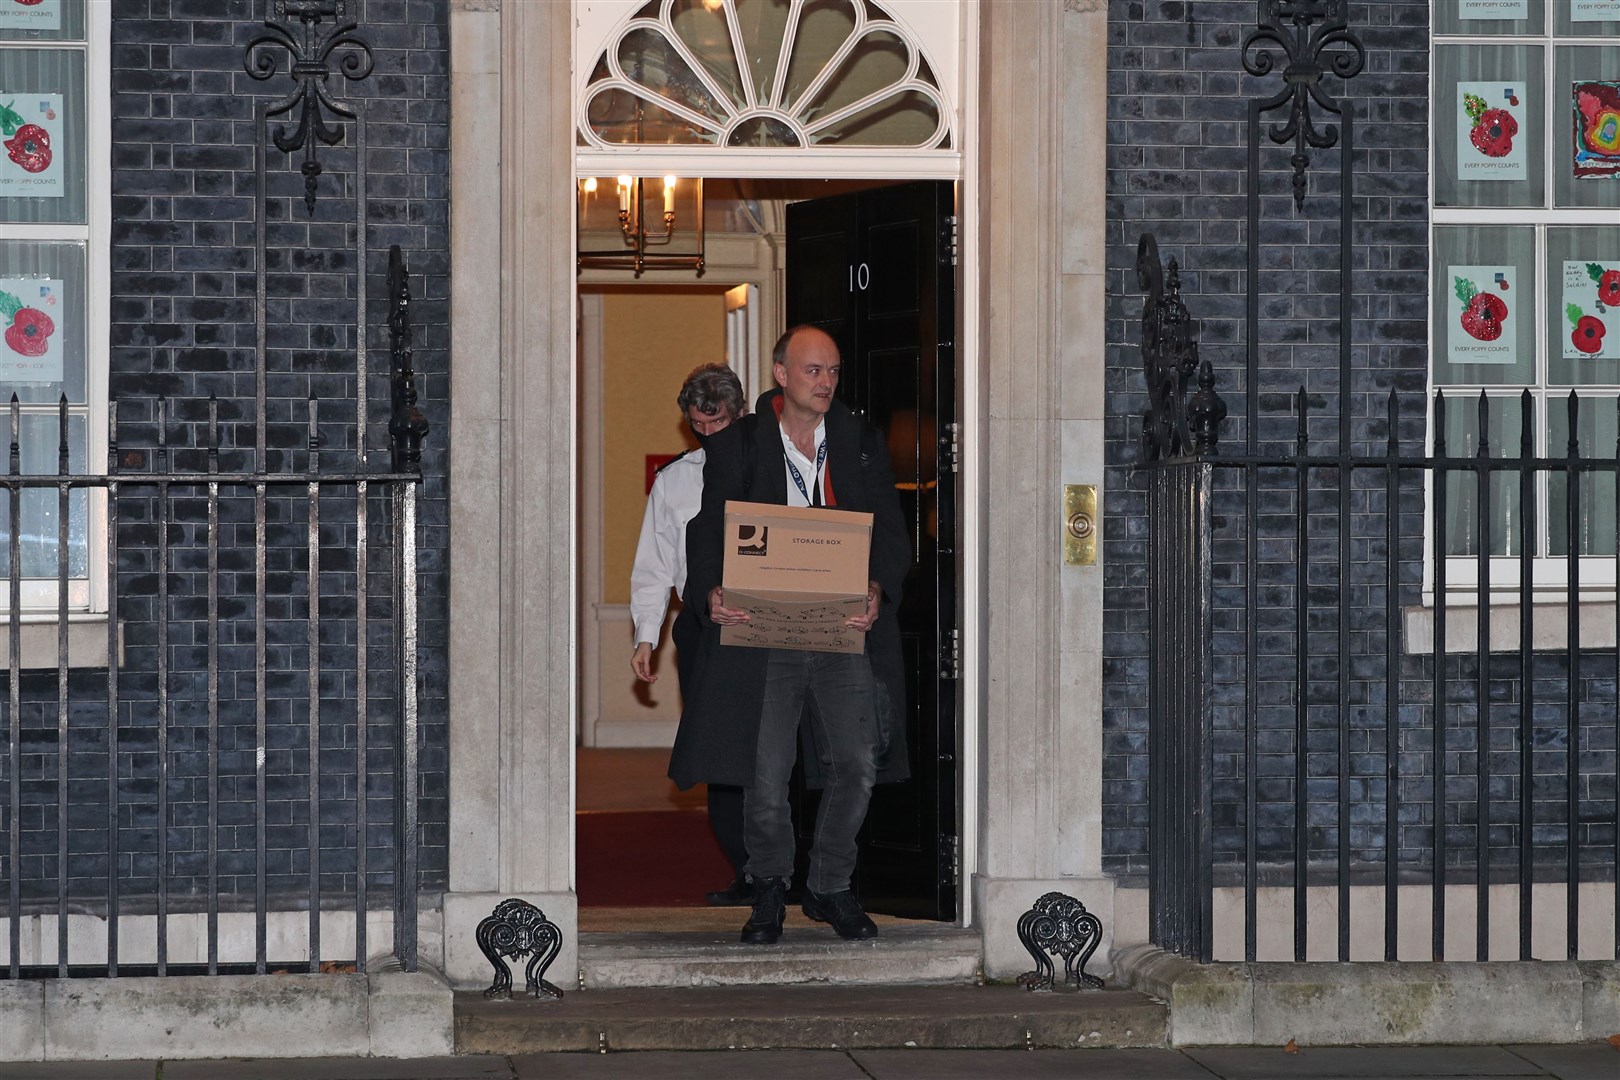 Dominic Cummings left 10 Downing Street following a behind the scenes row in November (Yui Mok/PA)